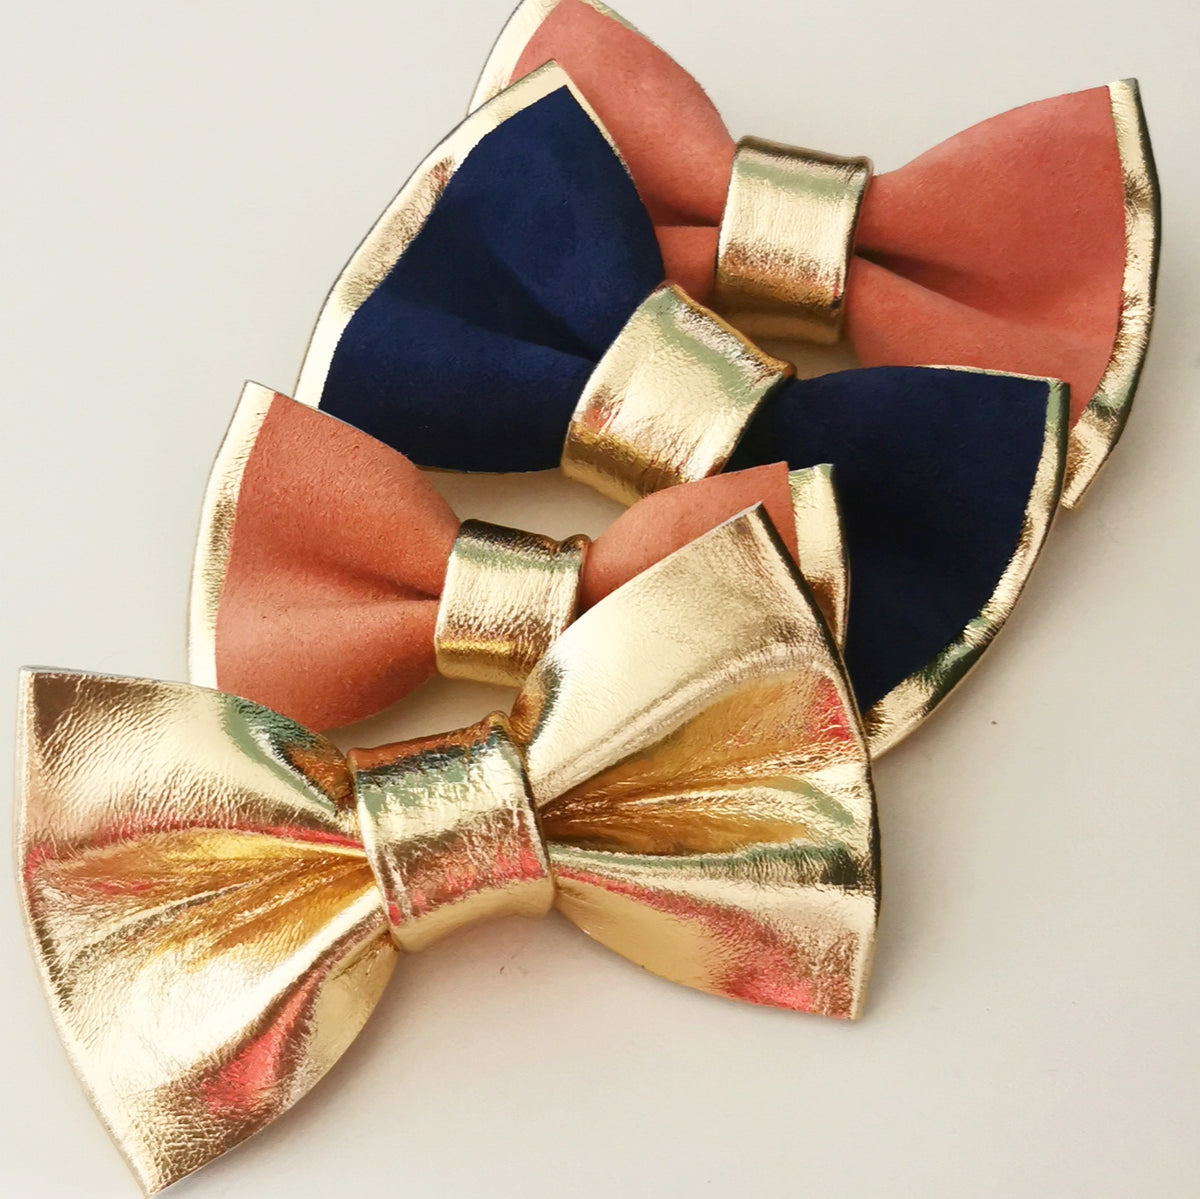 Gold Bow Ties